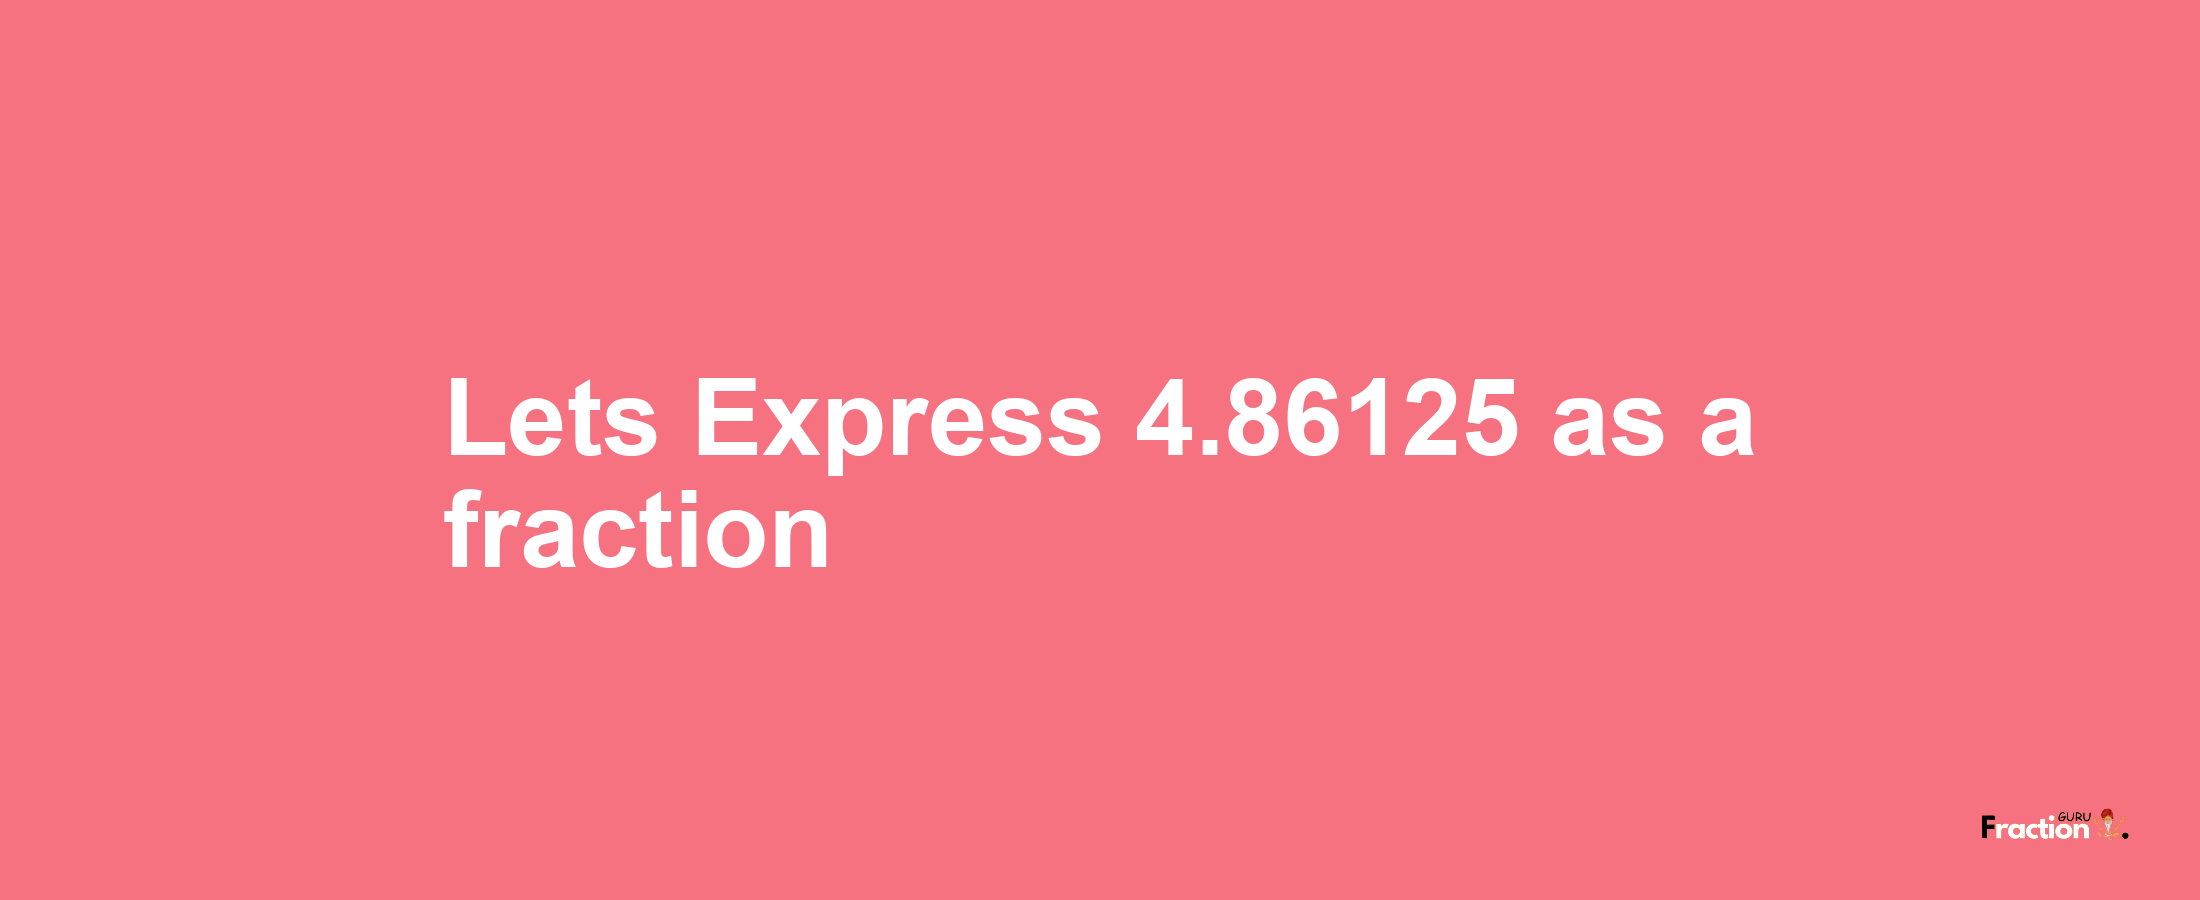 Lets Express 4.86125 as afraction